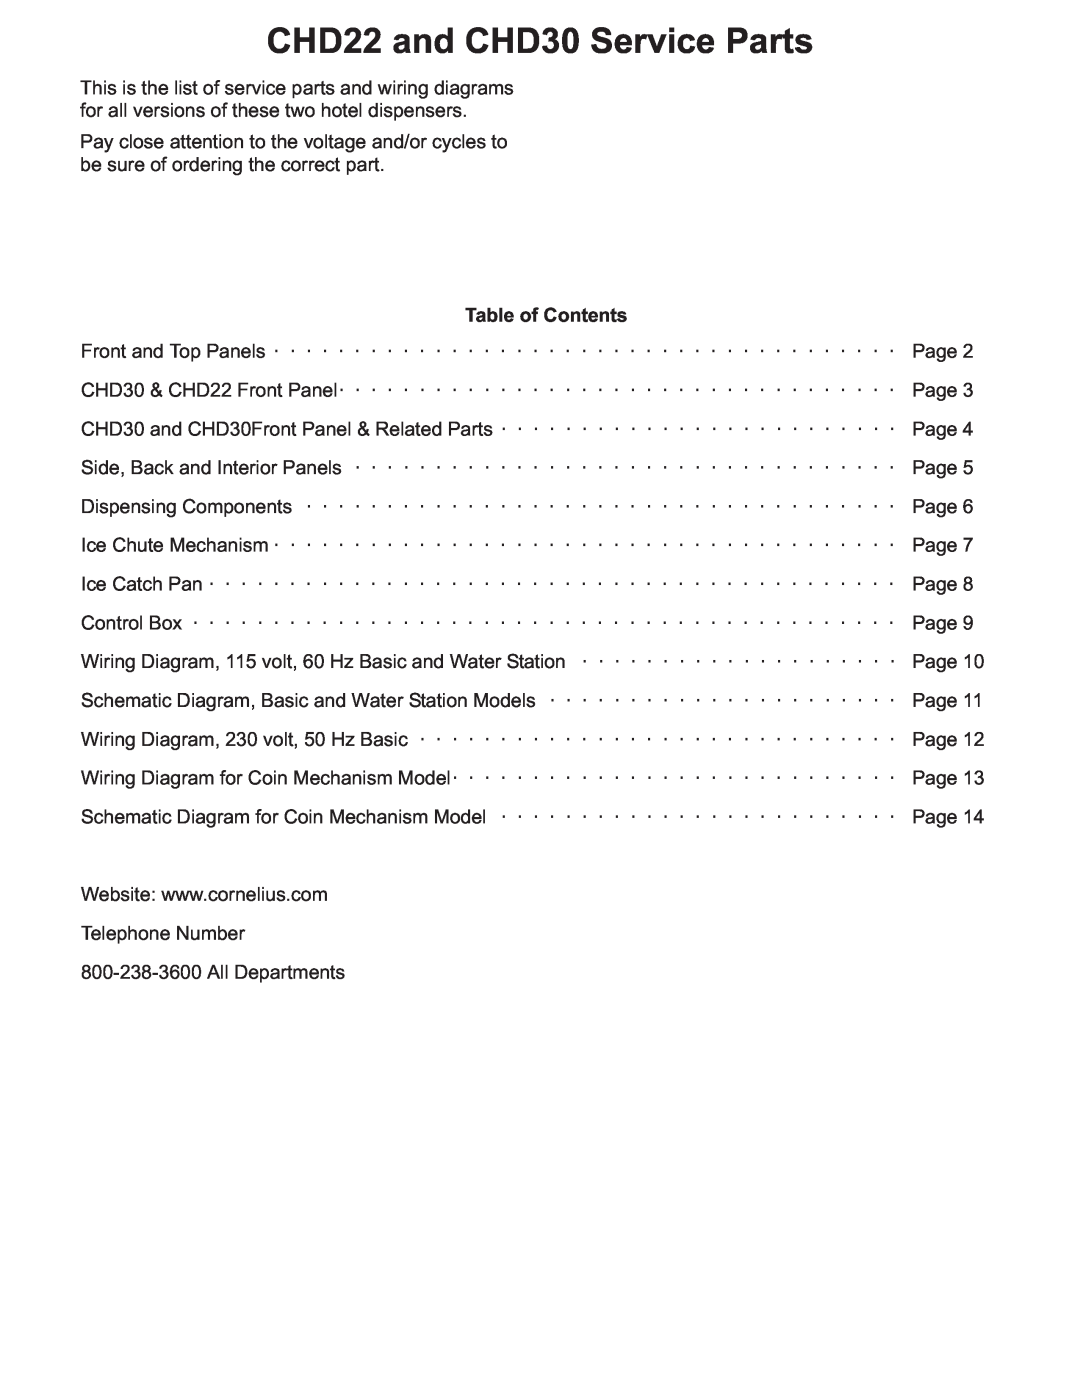 Cornelius manual CHD22 and CHD30 Service Parts, Table of Contents 